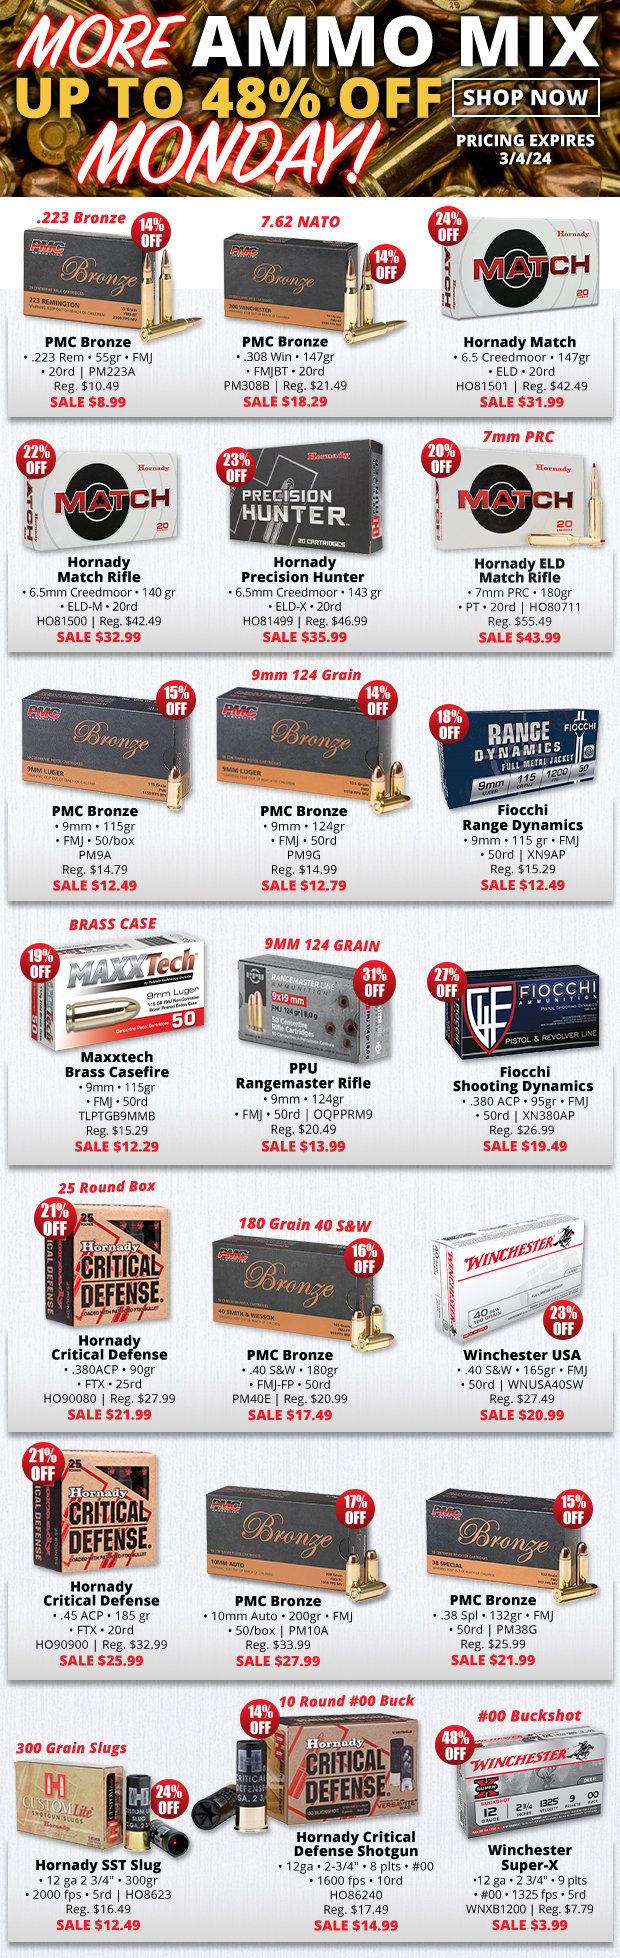 Up to 48% Off Ammo on More Ammo Monday!